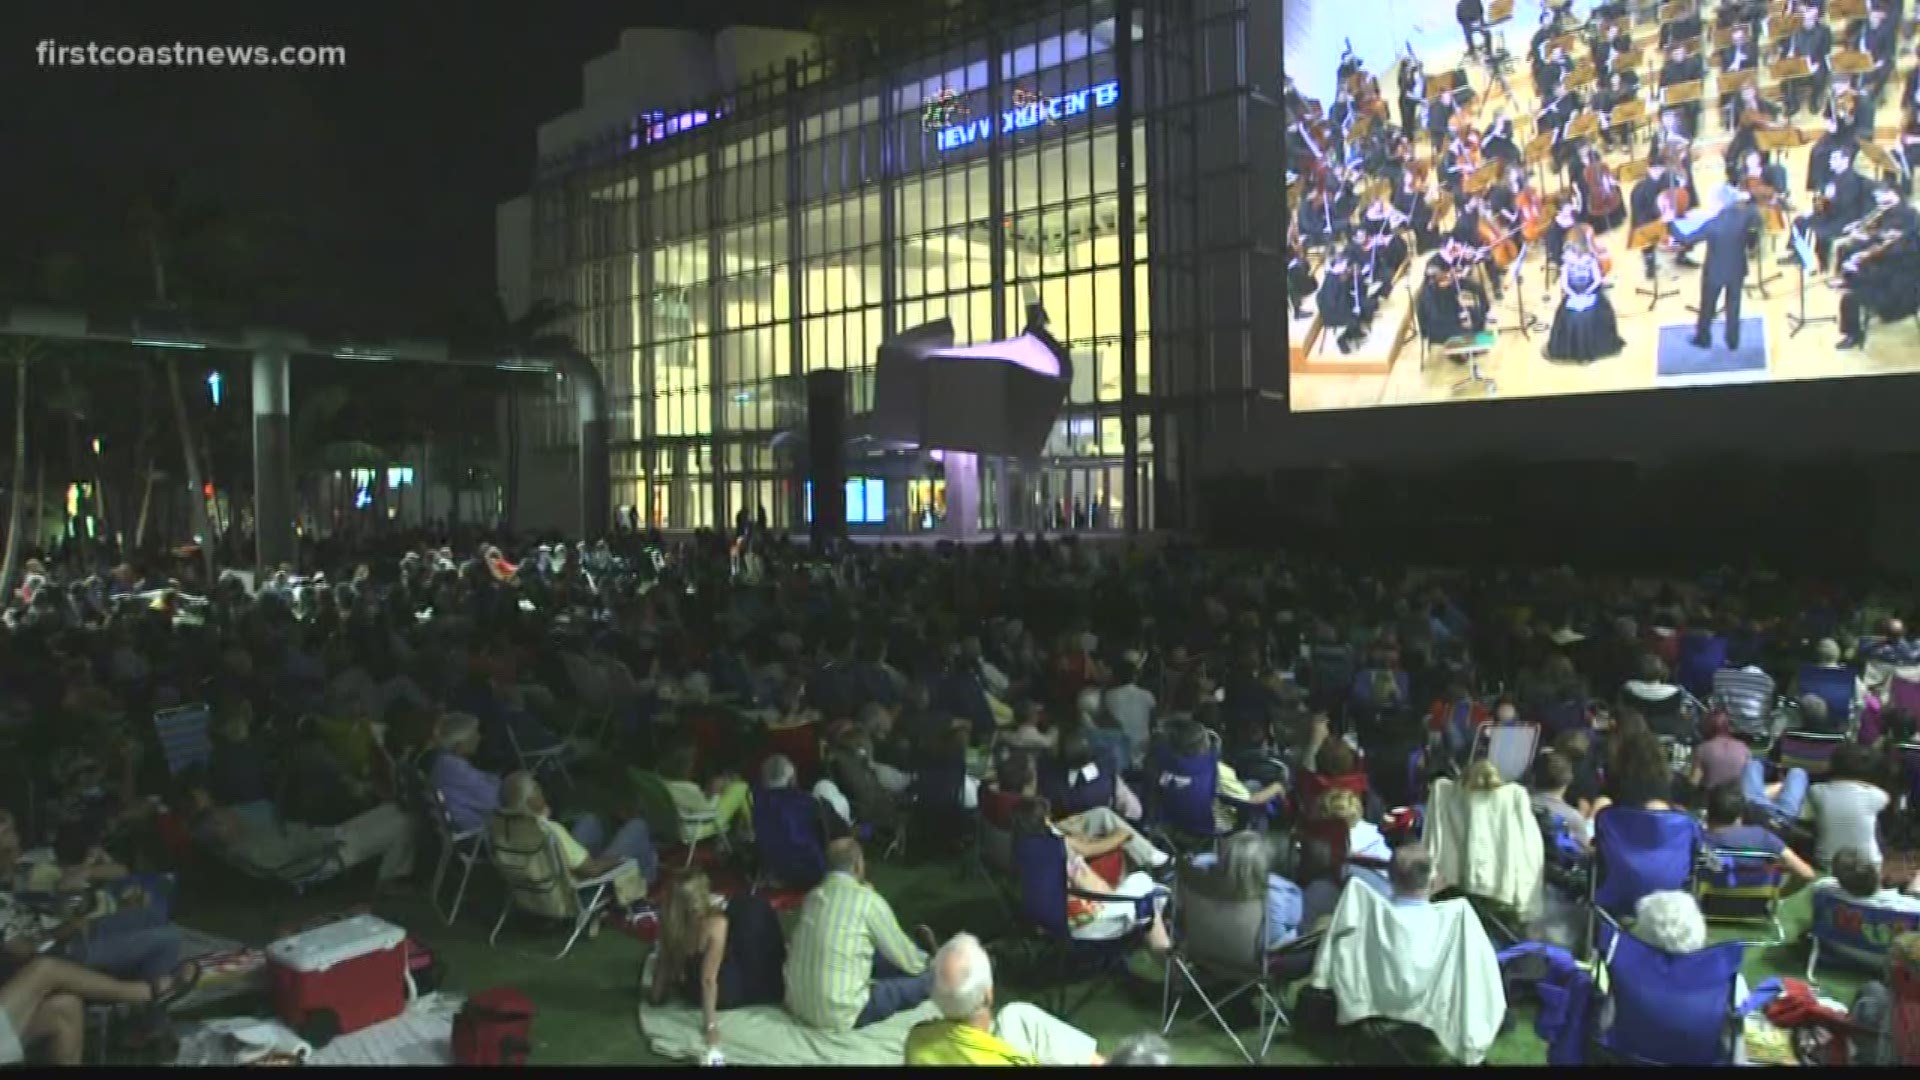 A massive $1.2 million outdoor projection venue could light up the Northbank in Downtown Jacksonville if the city council approves the funding.